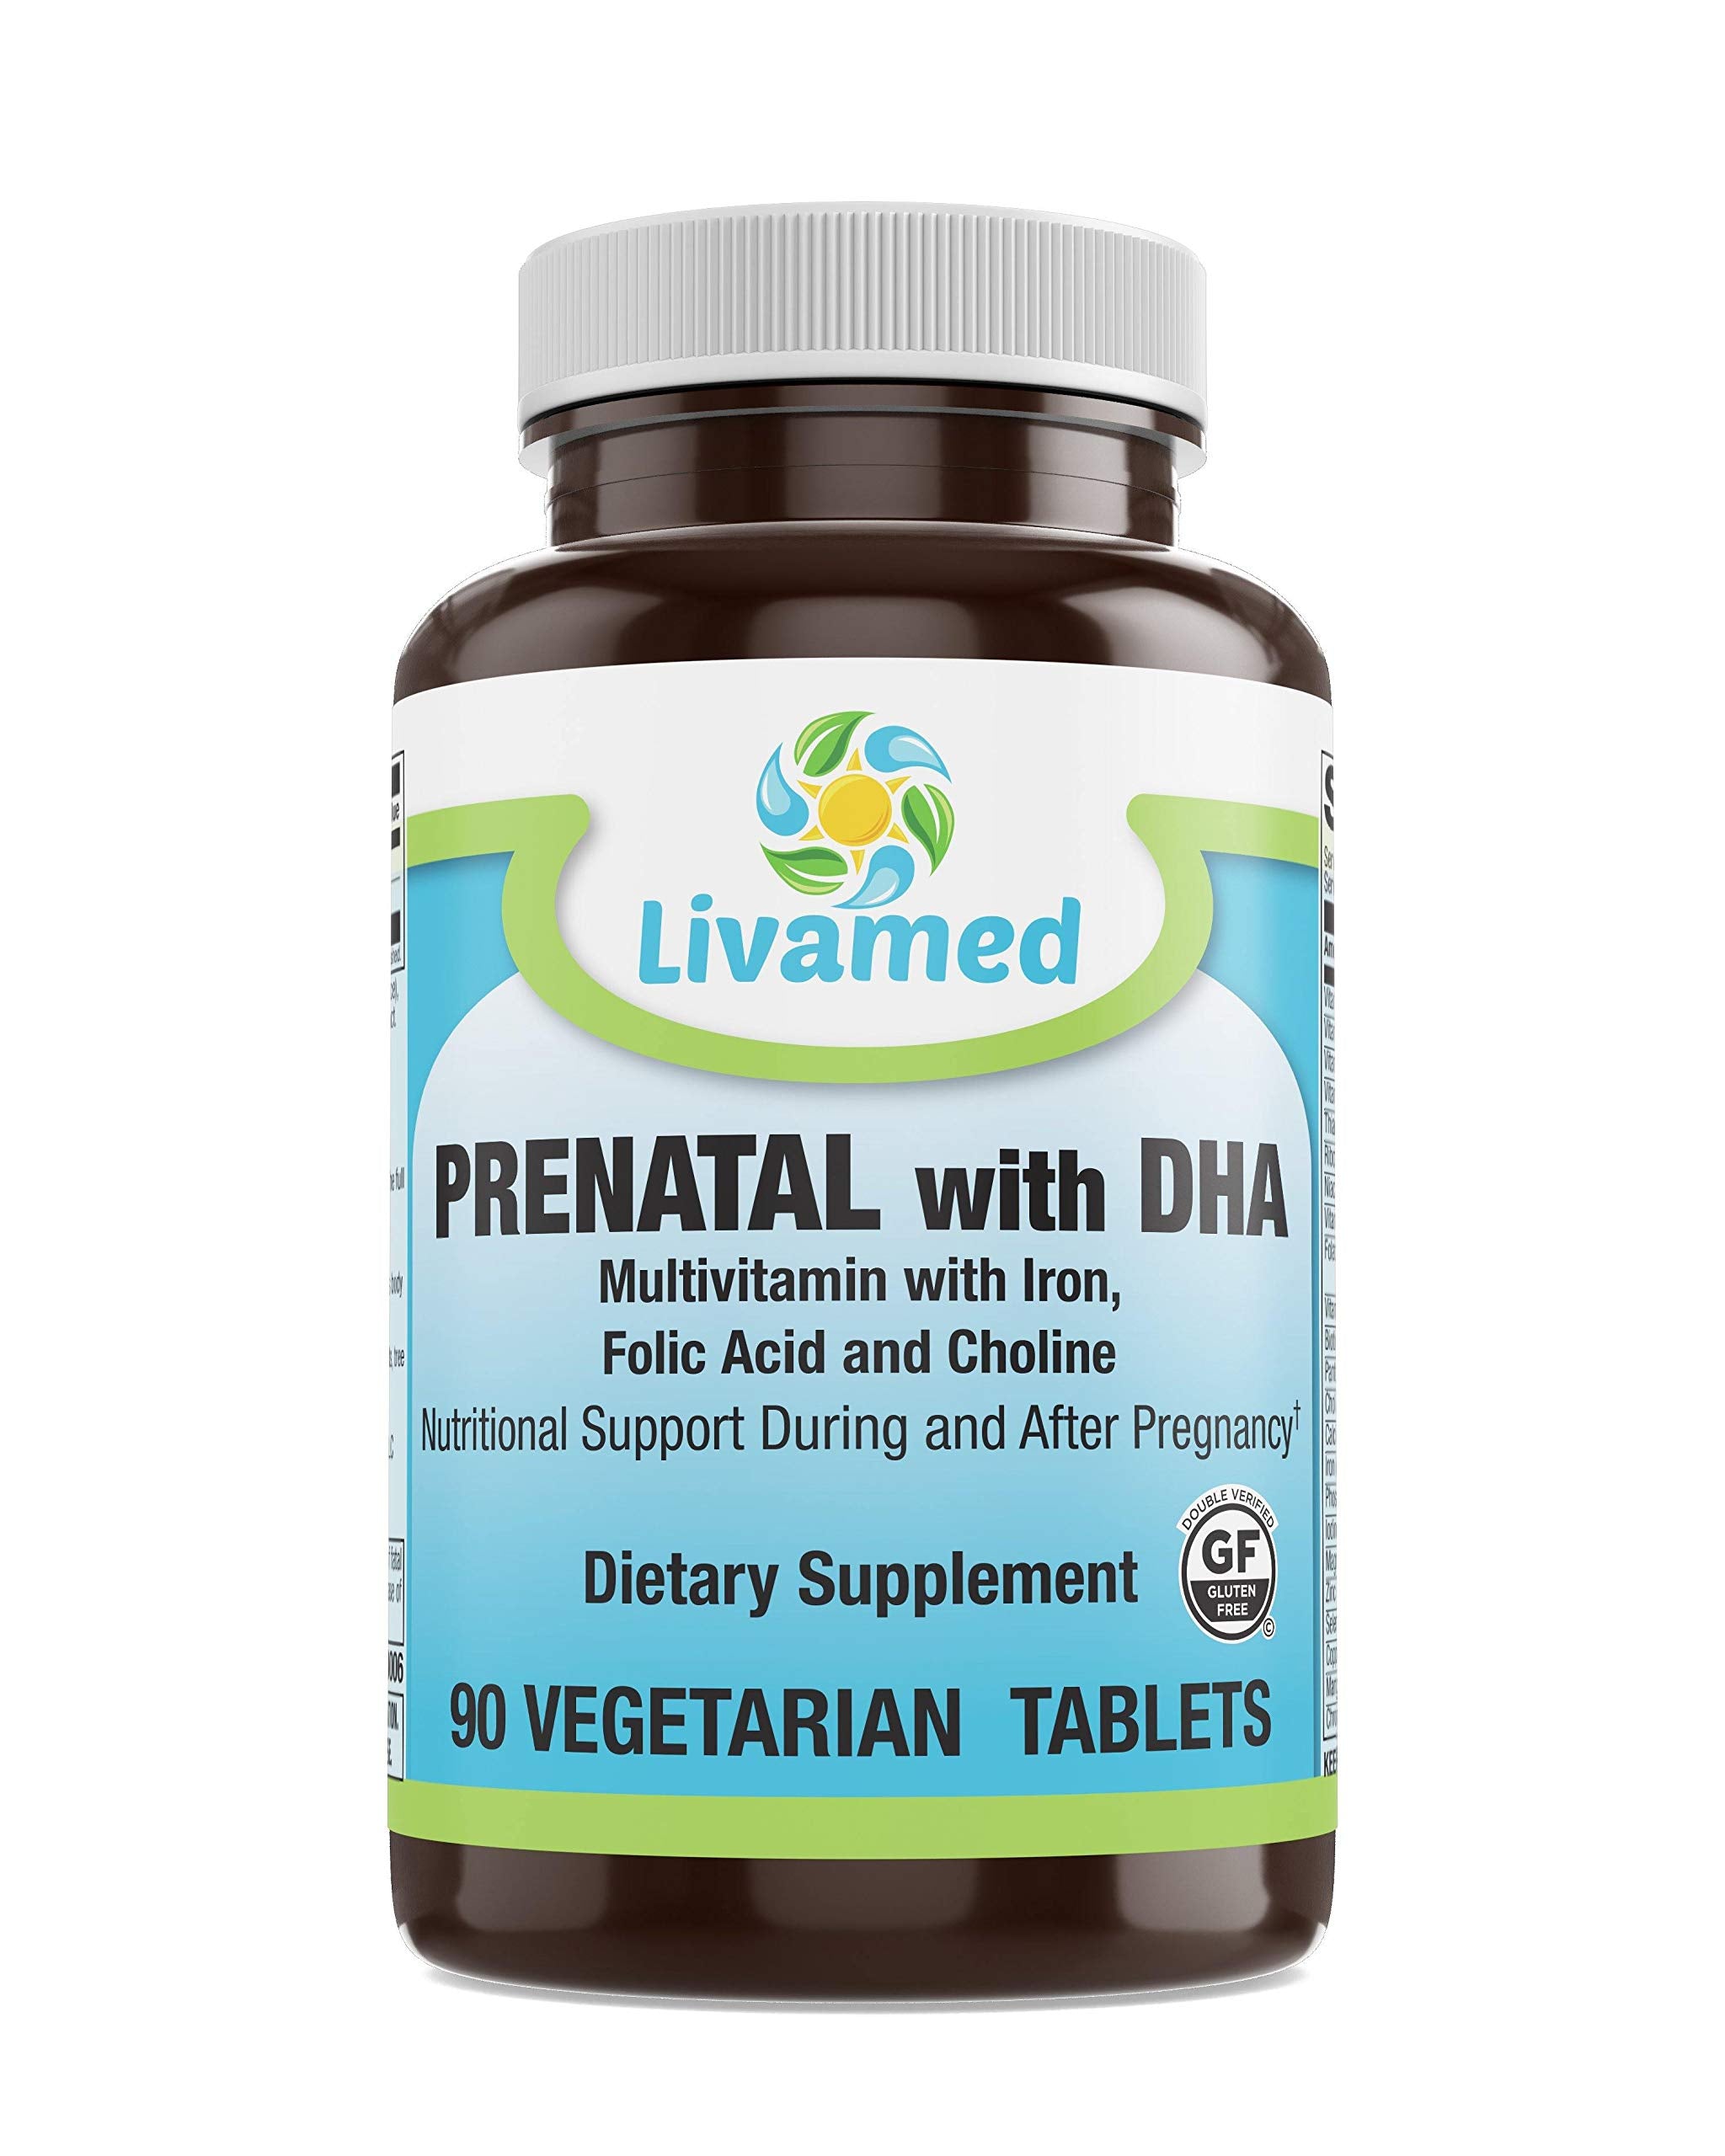 Livamed - Prenatal with DHA Veg Tabs 90 Count